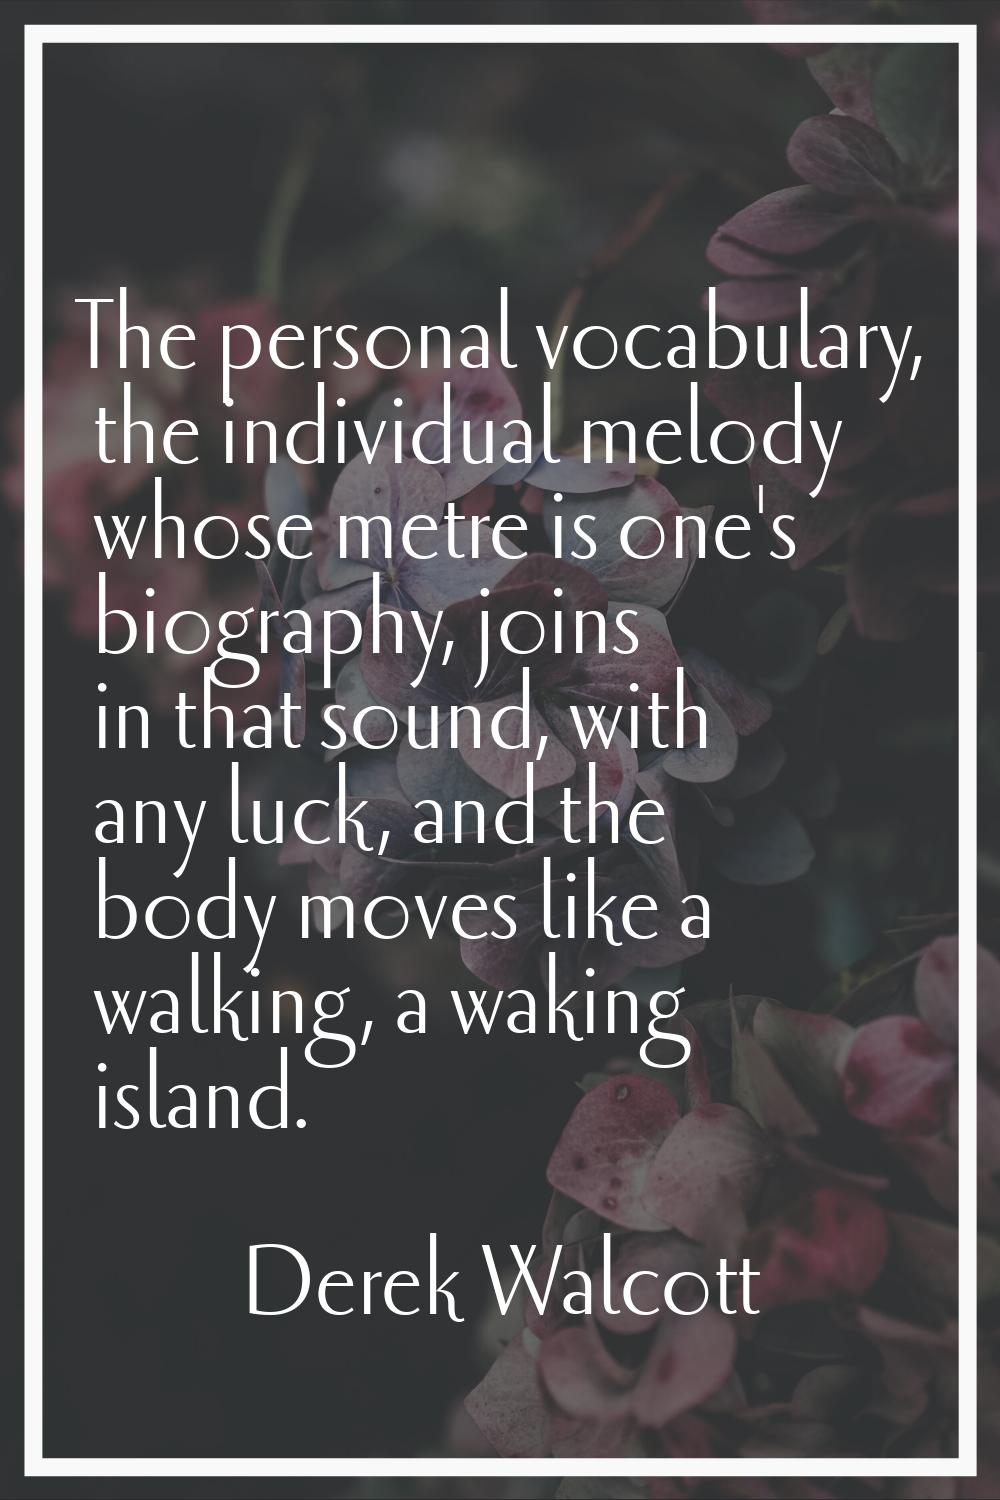 The personal vocabulary, the individual melody whose metre is one's biography, joins in that sound,